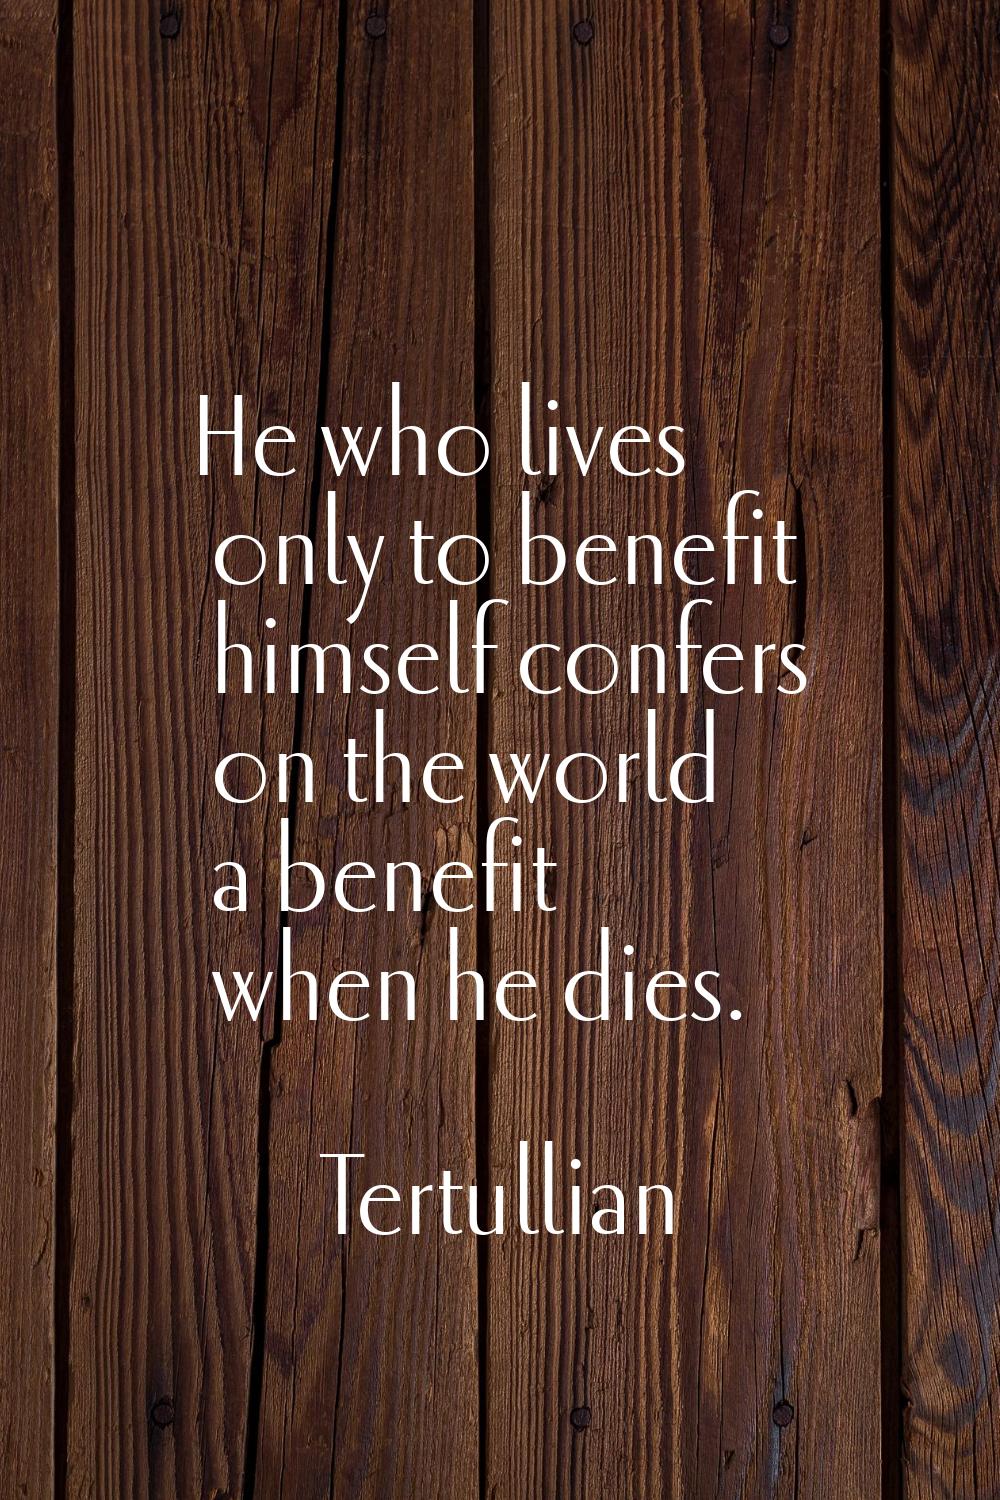 He who lives only to benefit himself confers on the world a benefit when he dies.